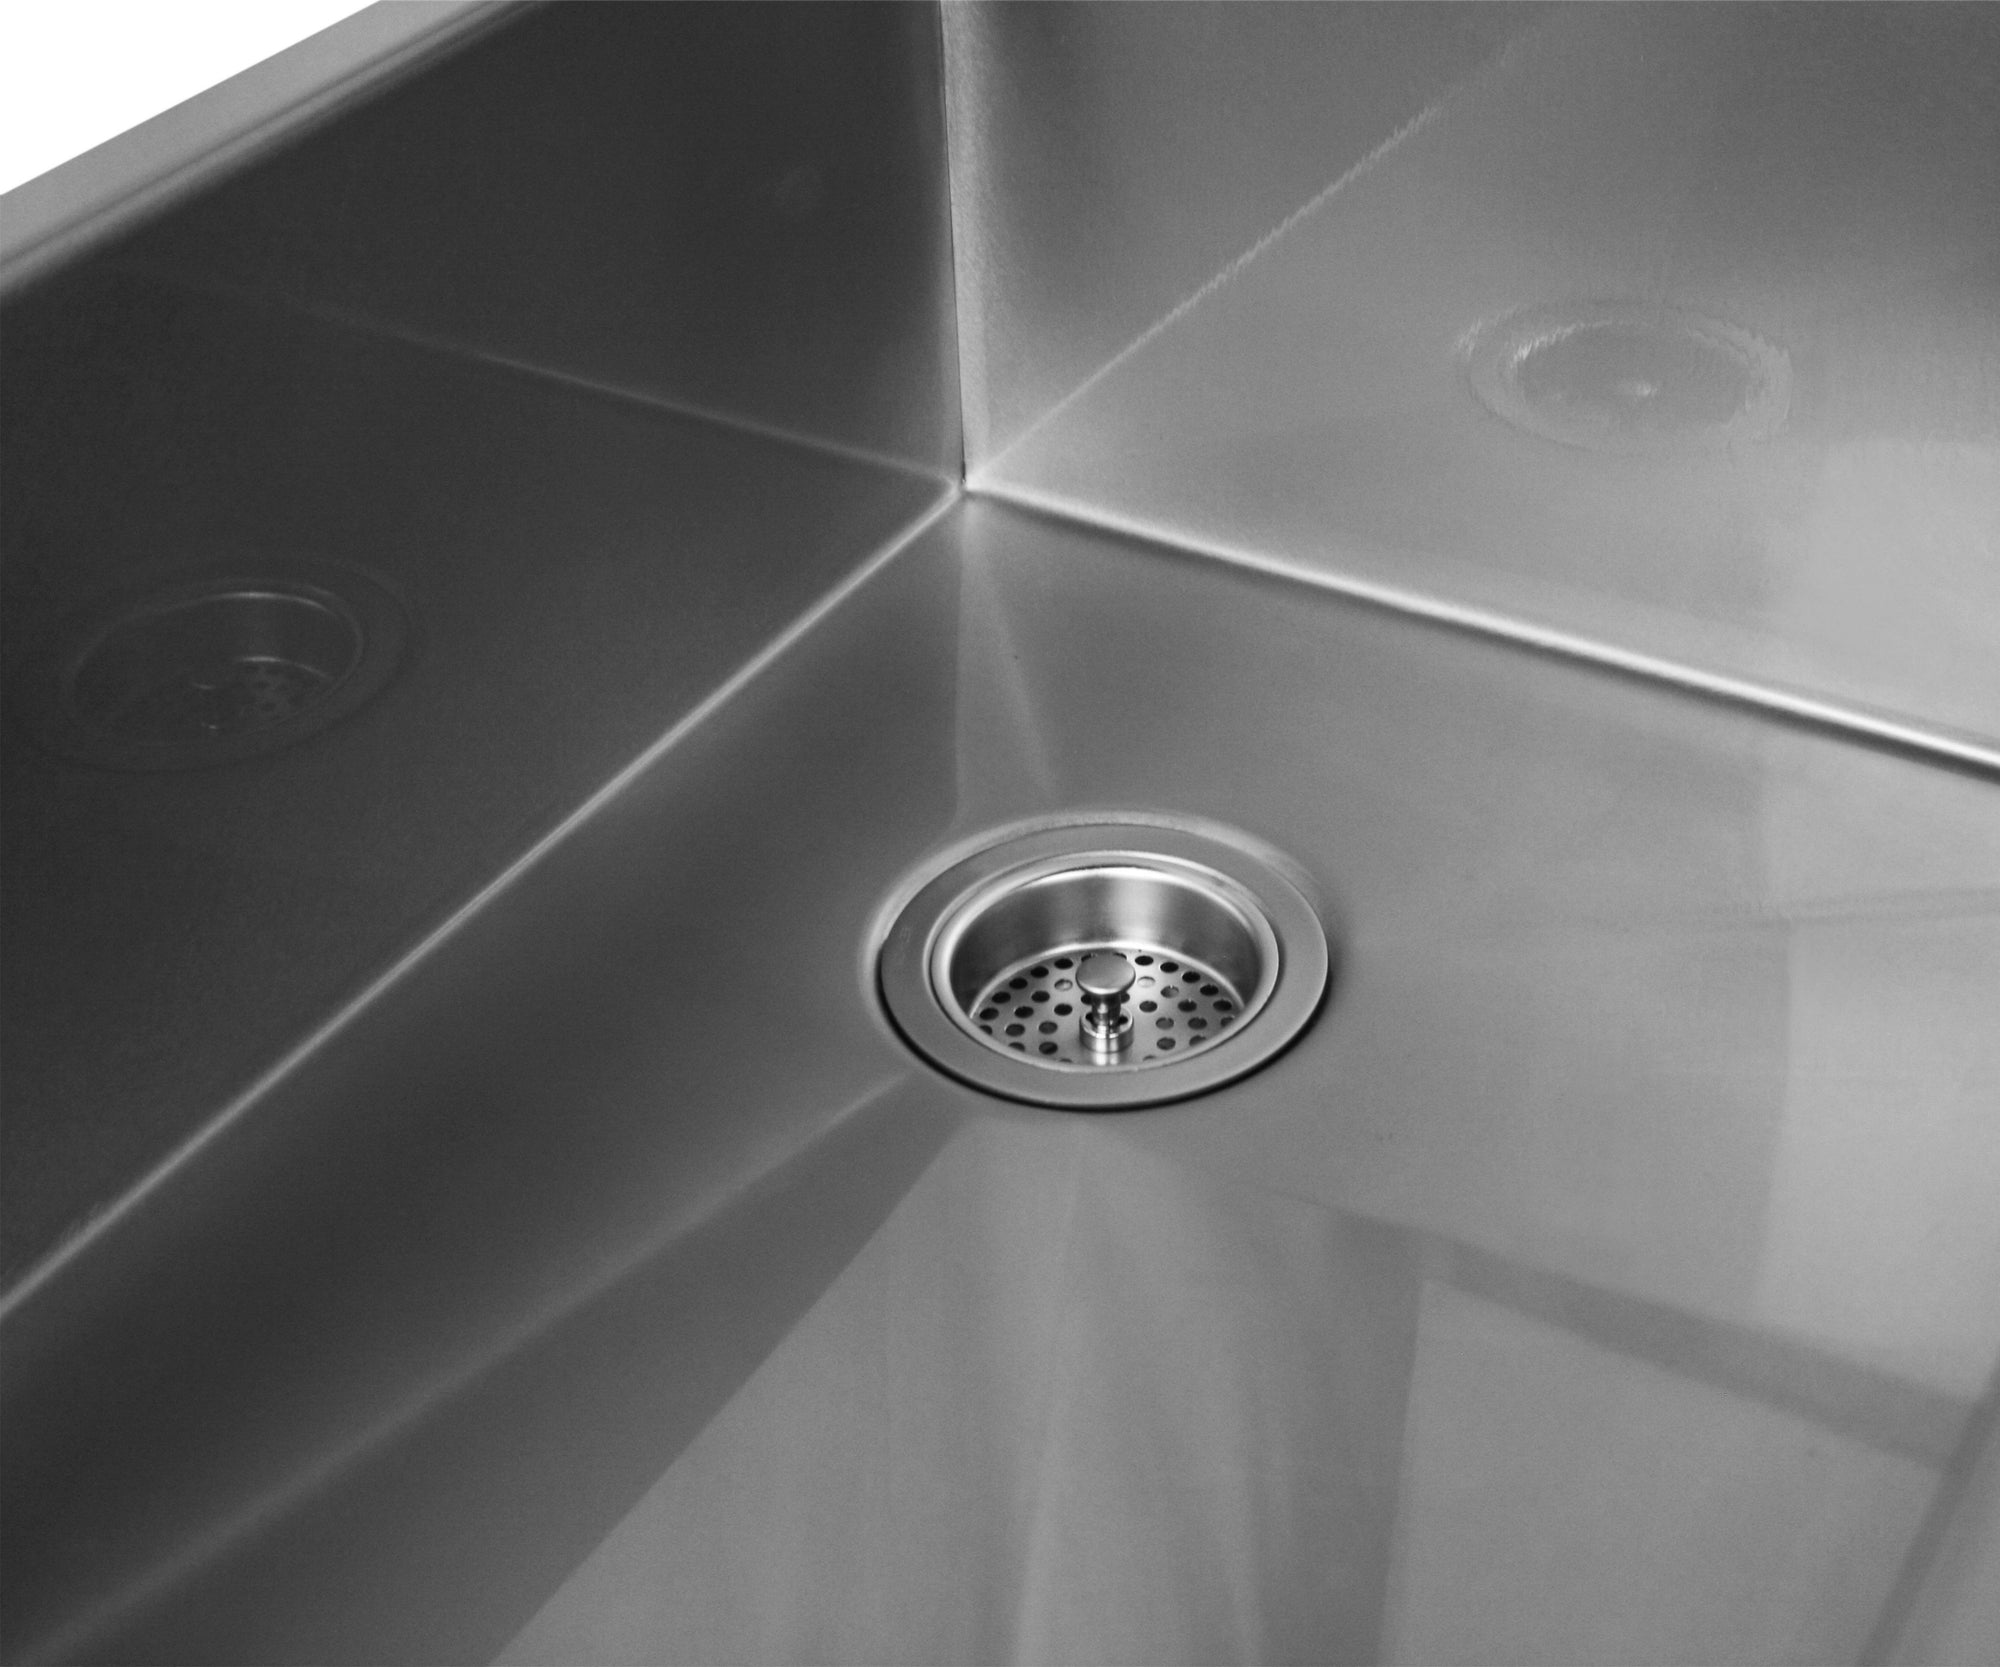 Luxe stainless steel farmer sink with right rear drain placement.